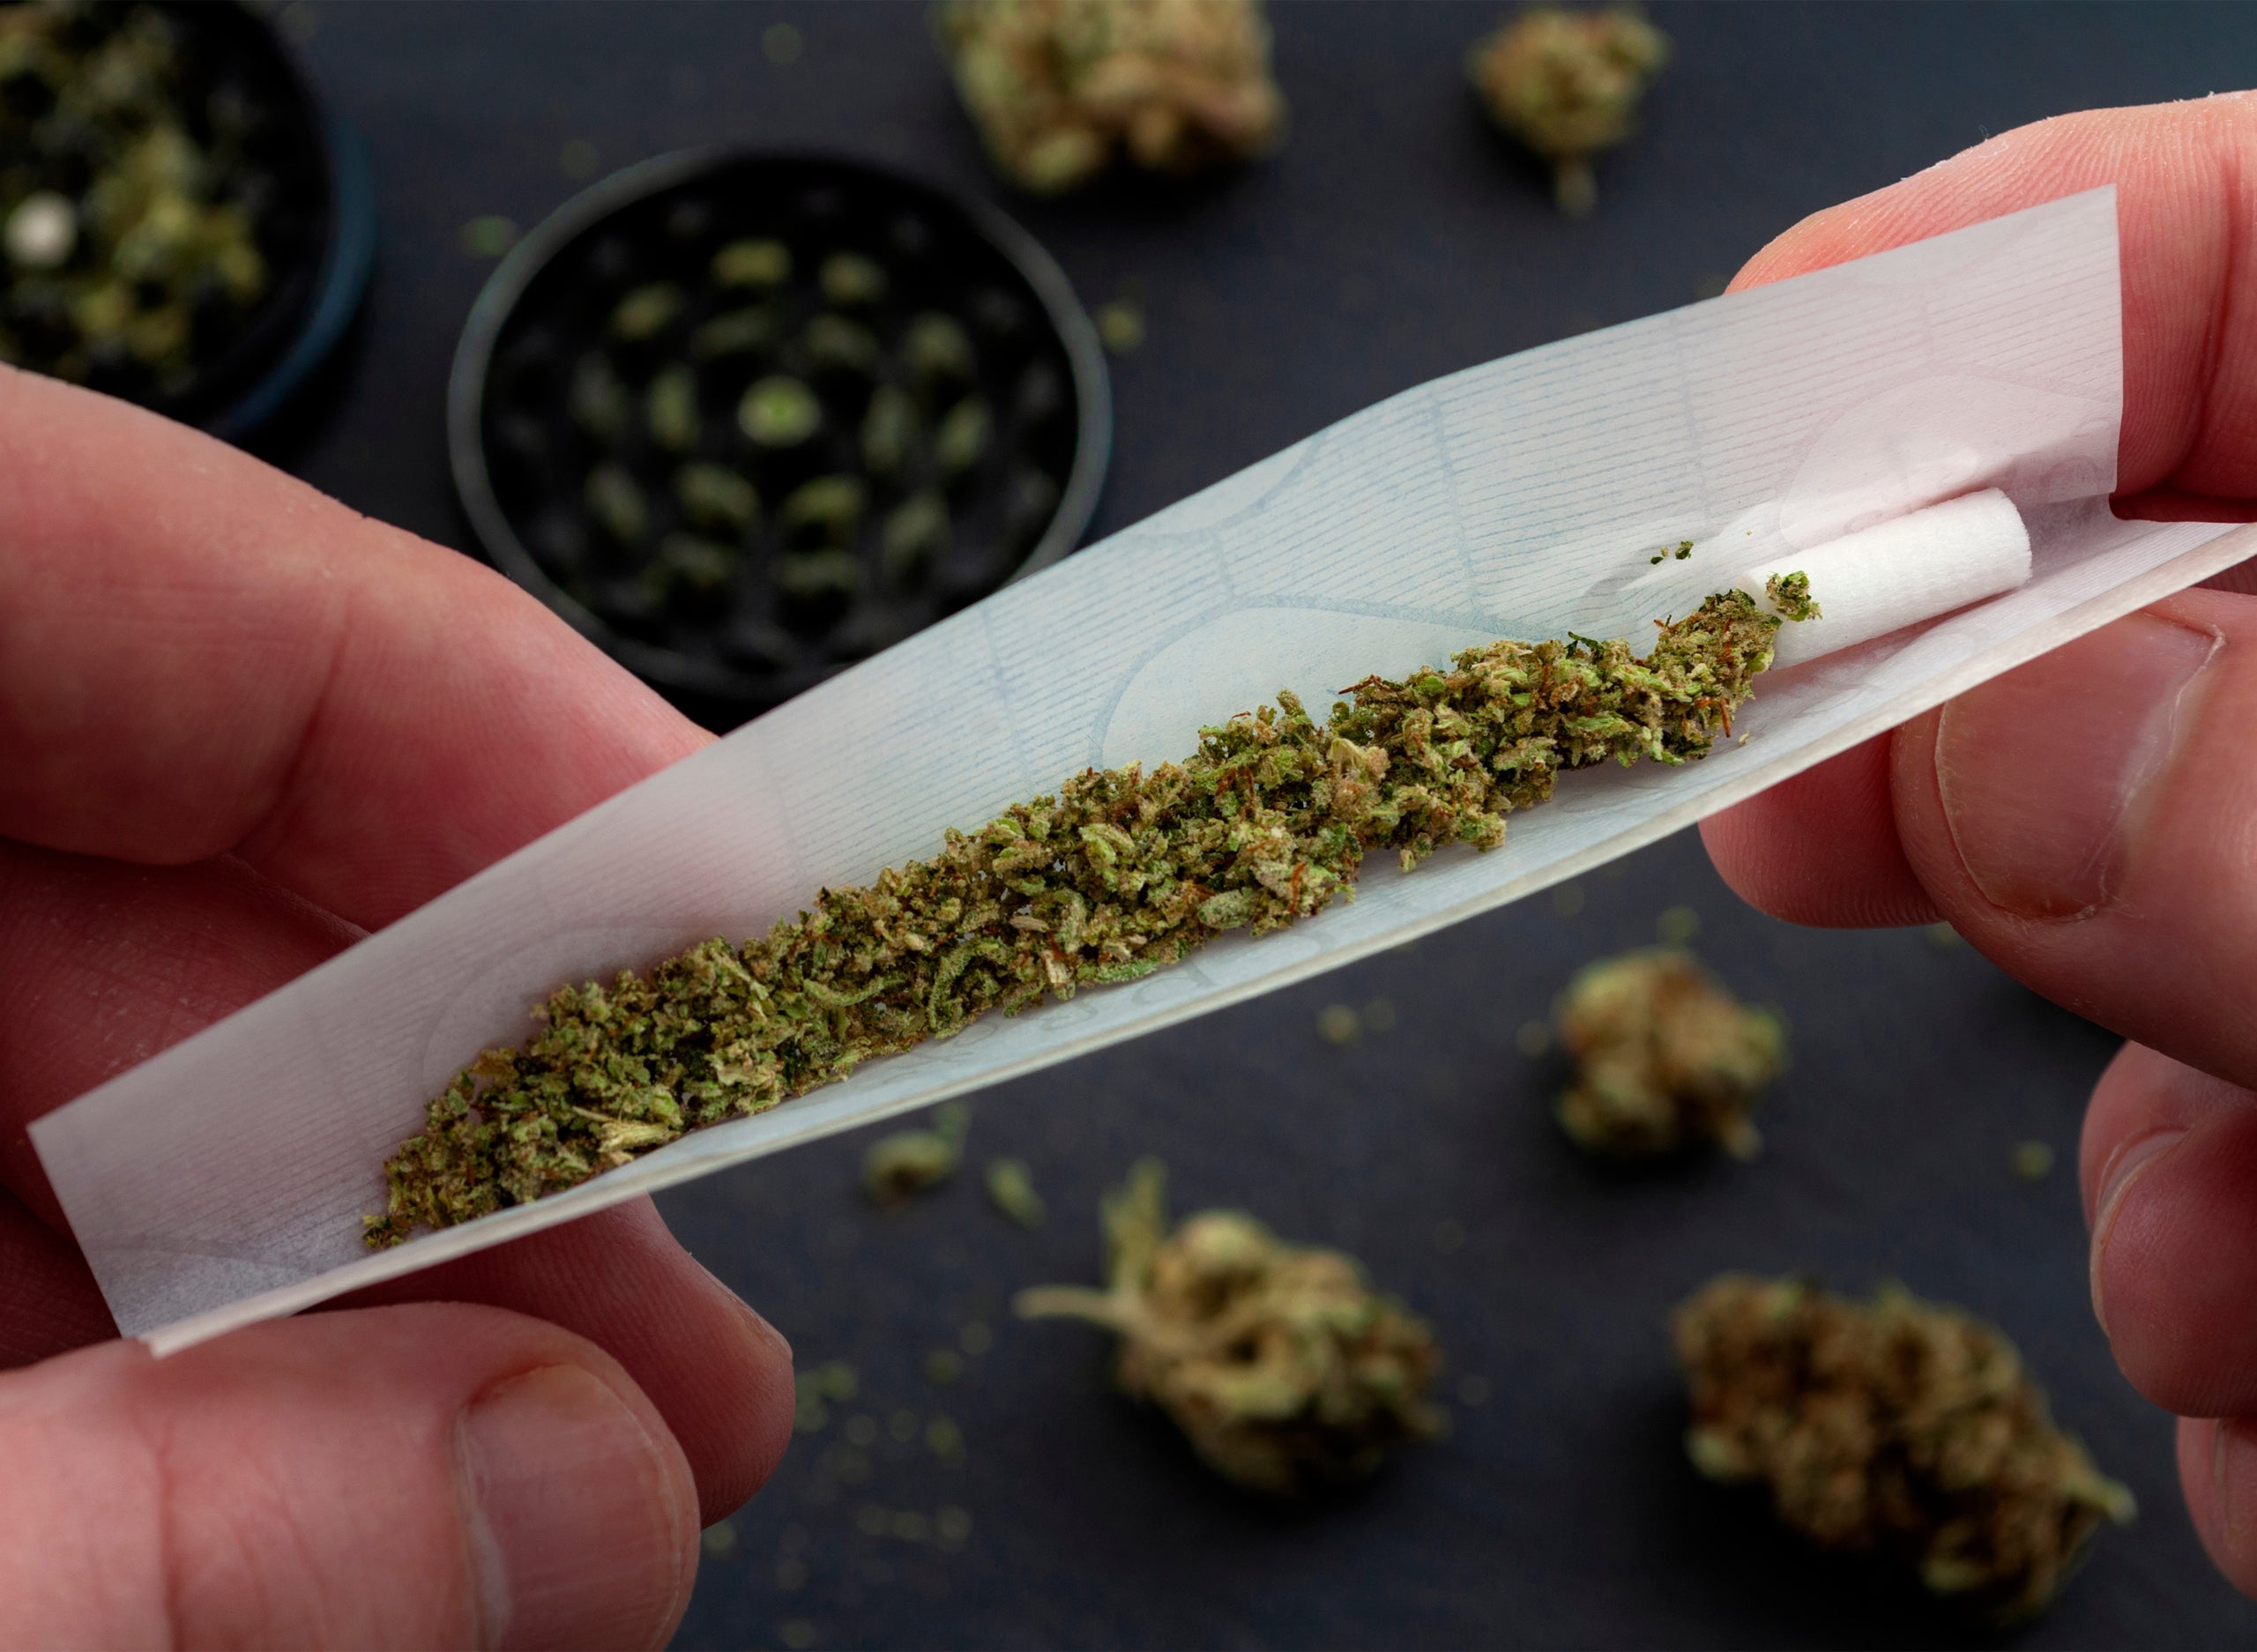 how to roll a blunt step by step